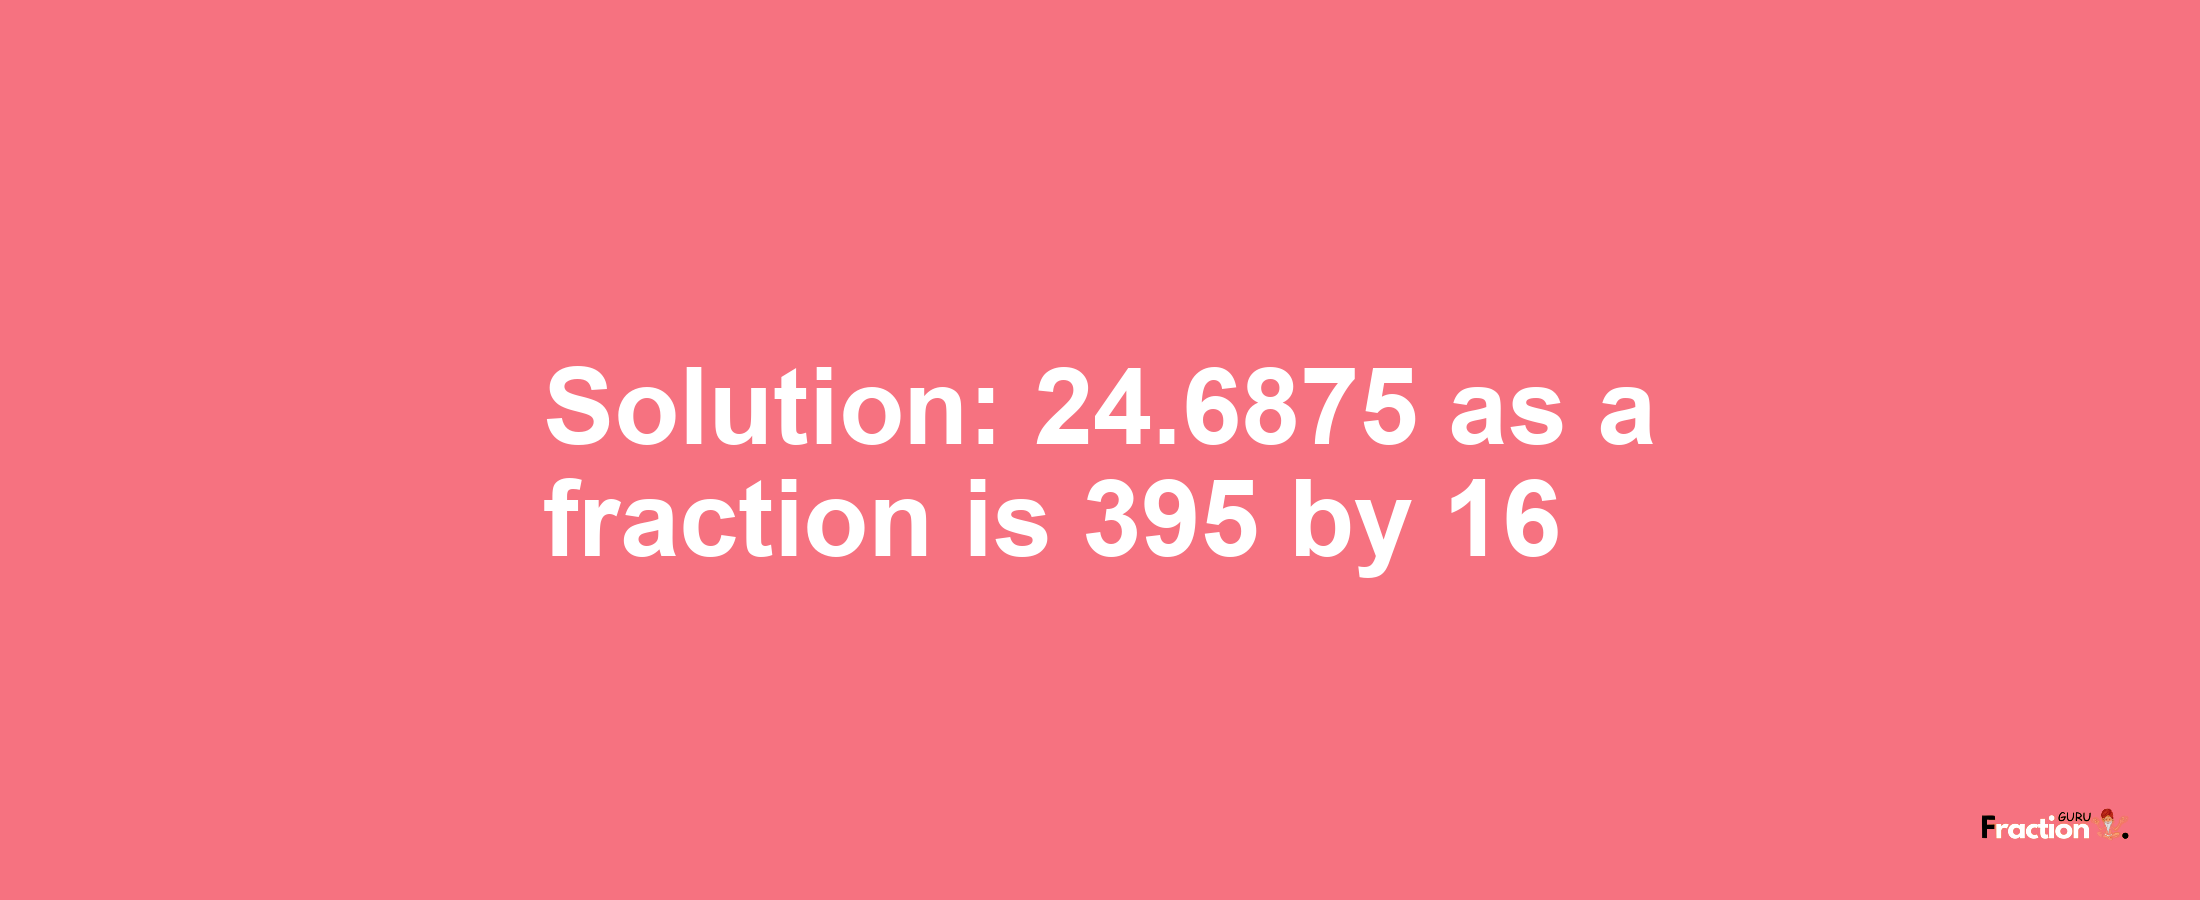 Solution:24.6875 as a fraction is 395/16